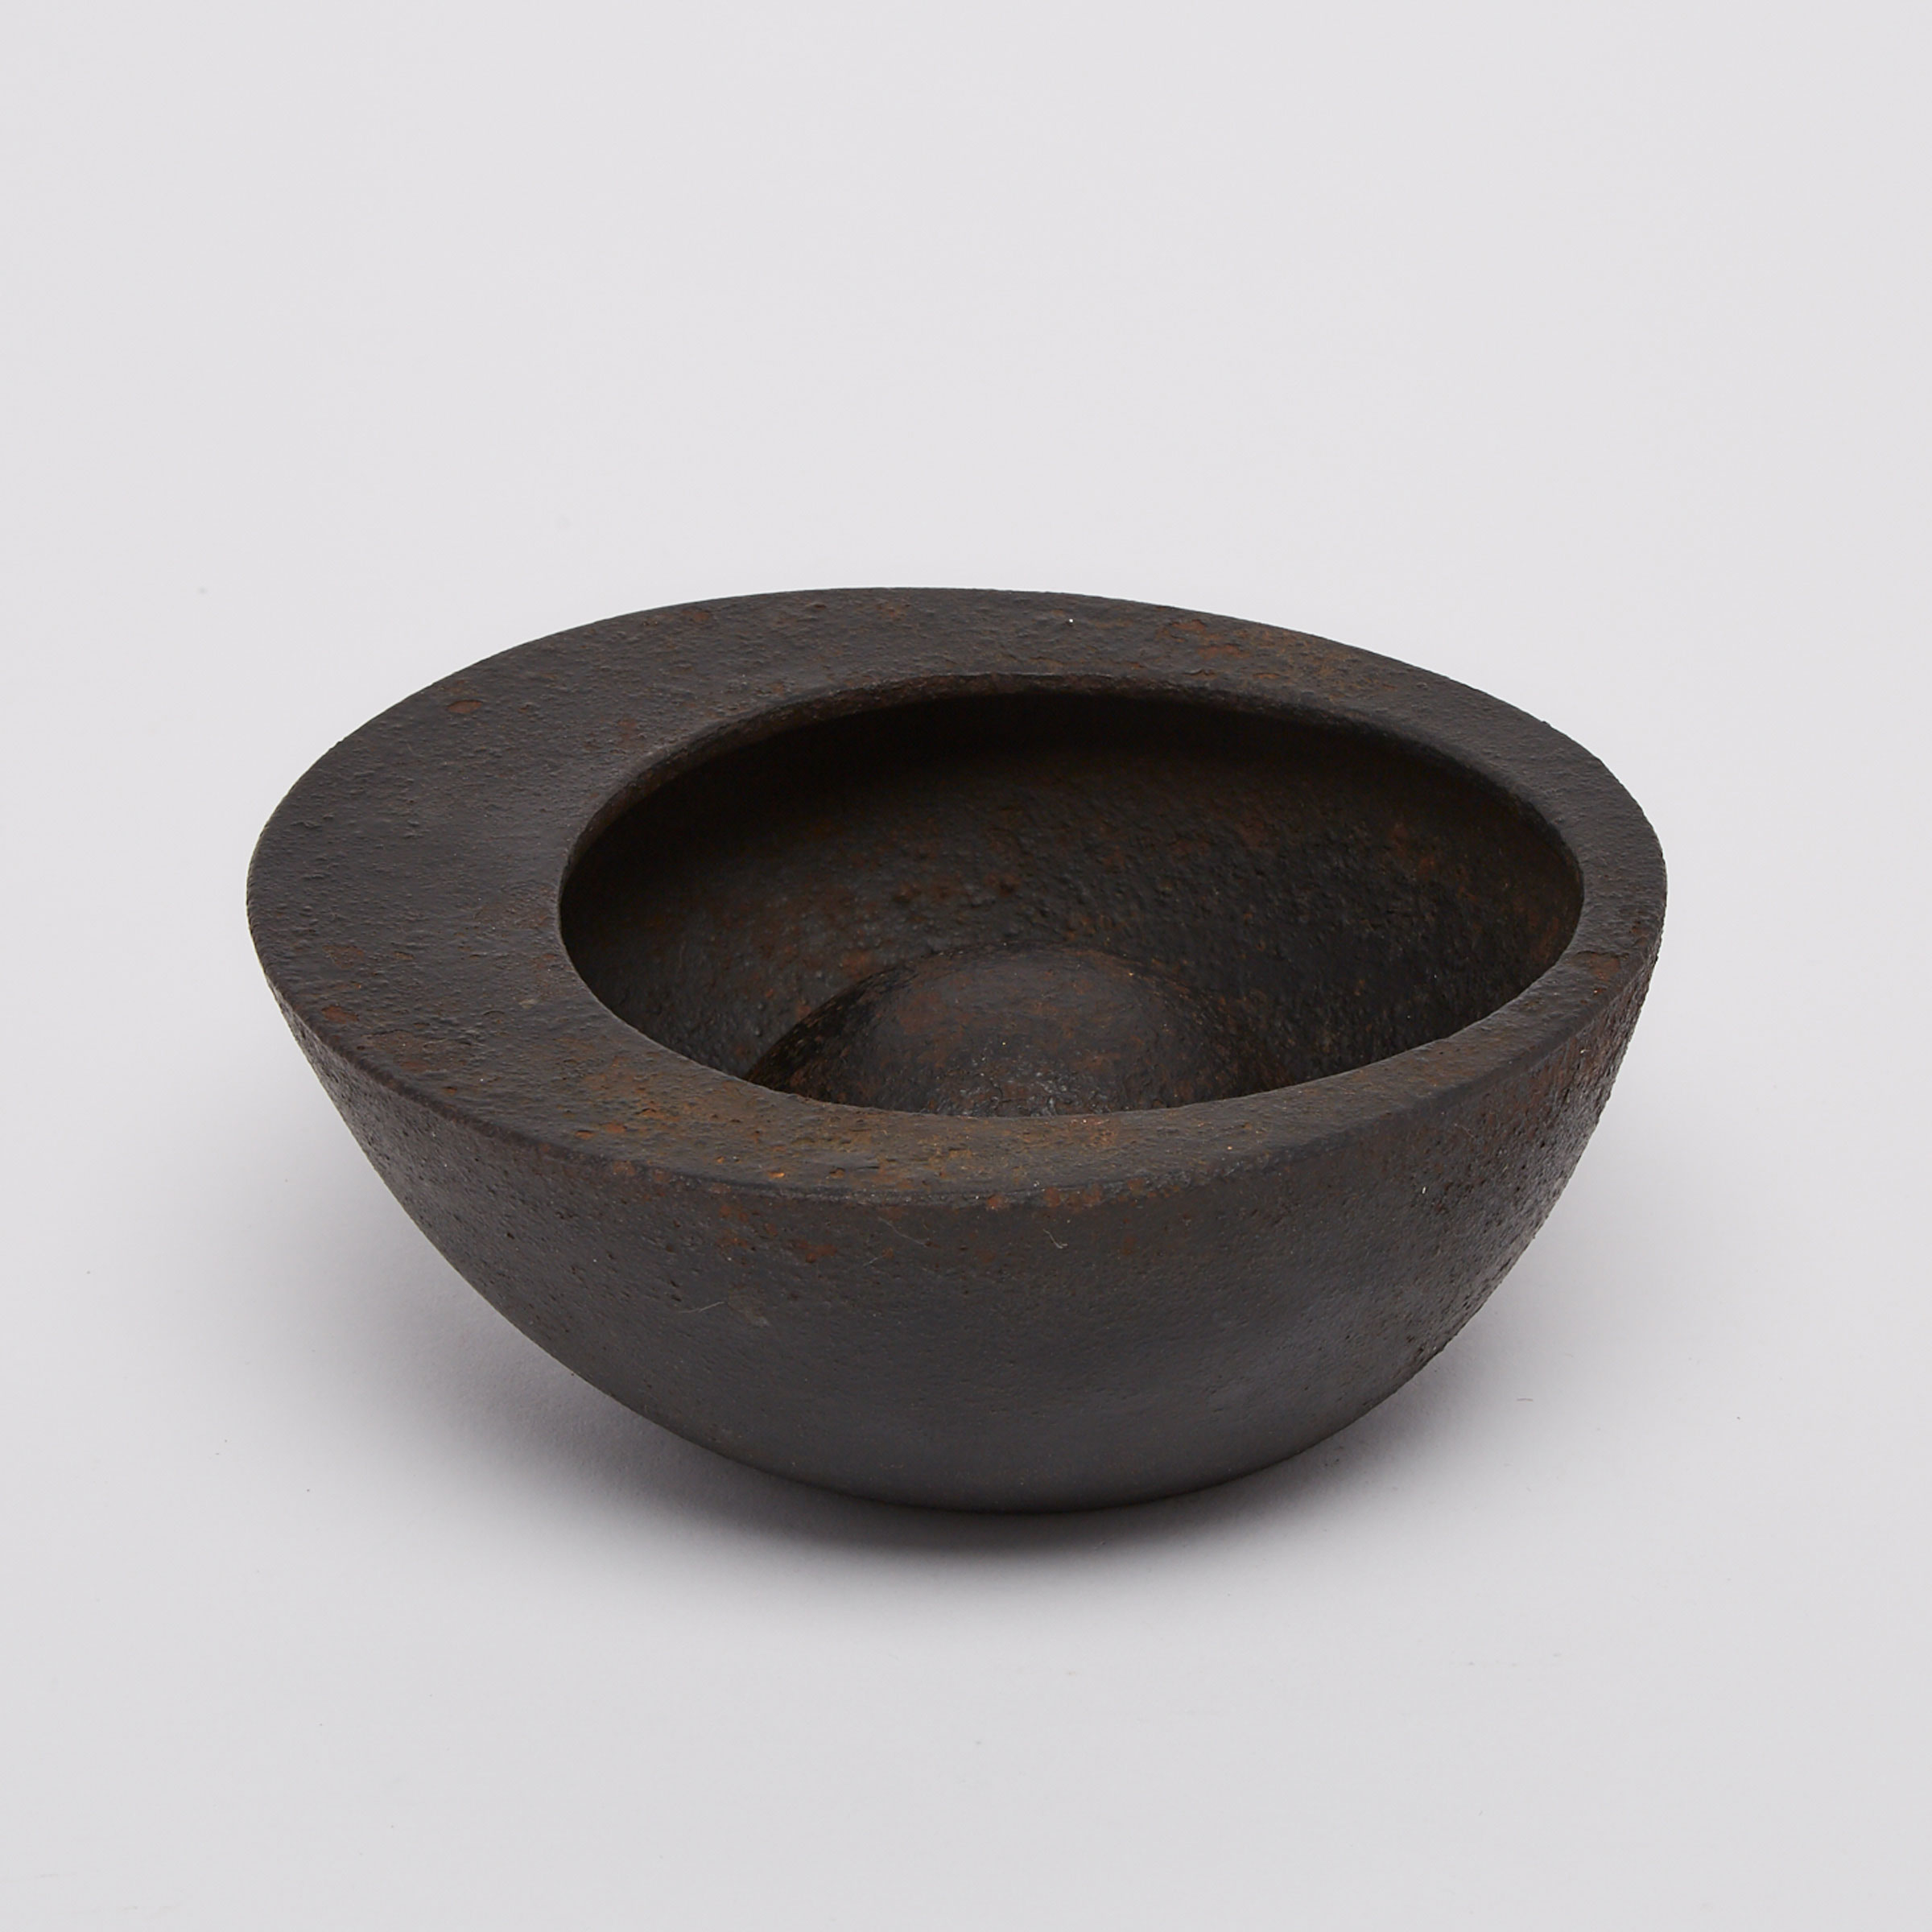 Attributed to Isamu Noguchi (American, 1904-1988) Ashtray for Bonniers, New York, c.1956